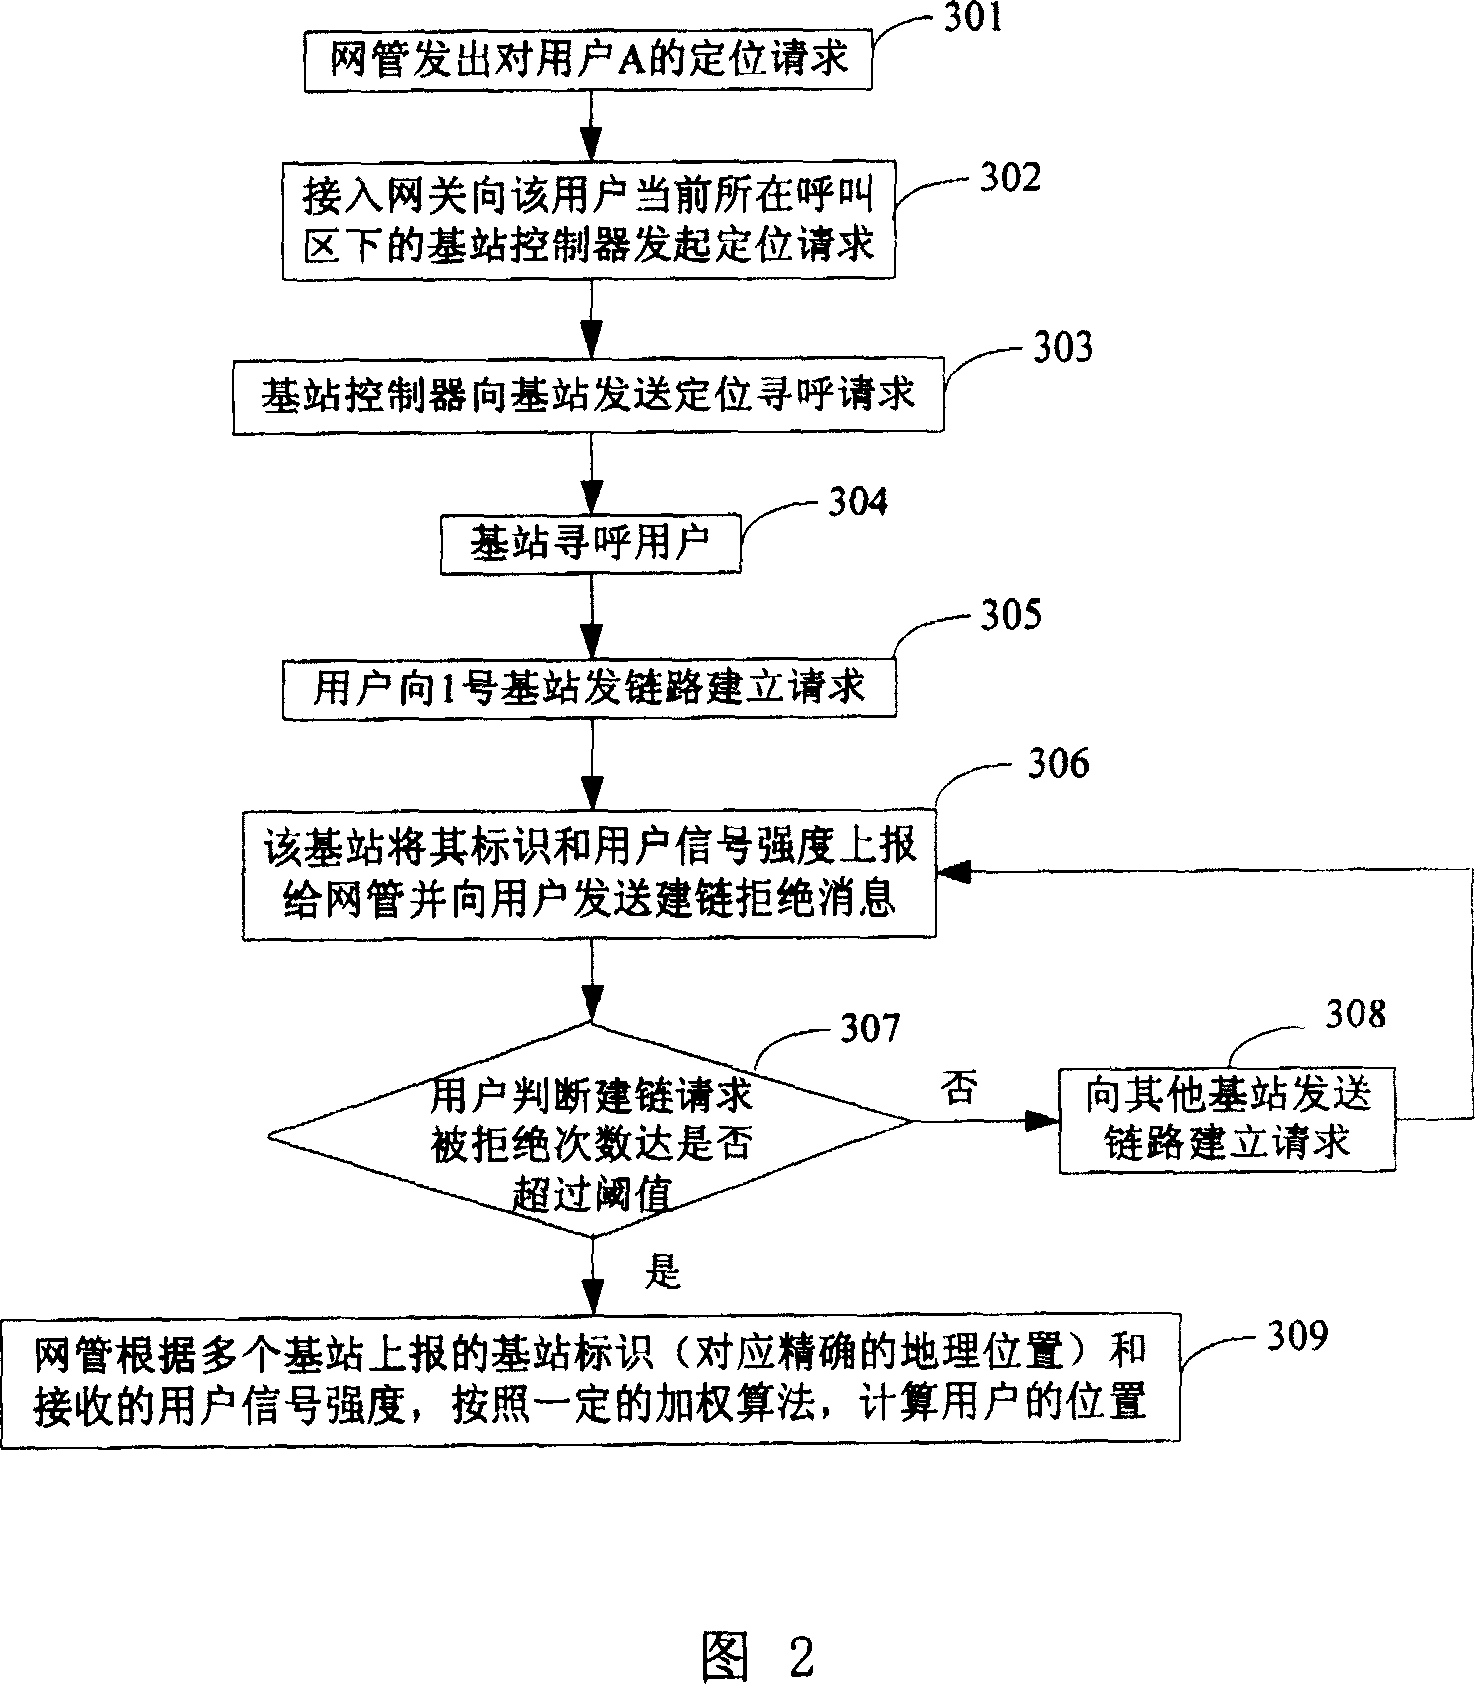 Accurately positioning method for personal hand-held telephone system user